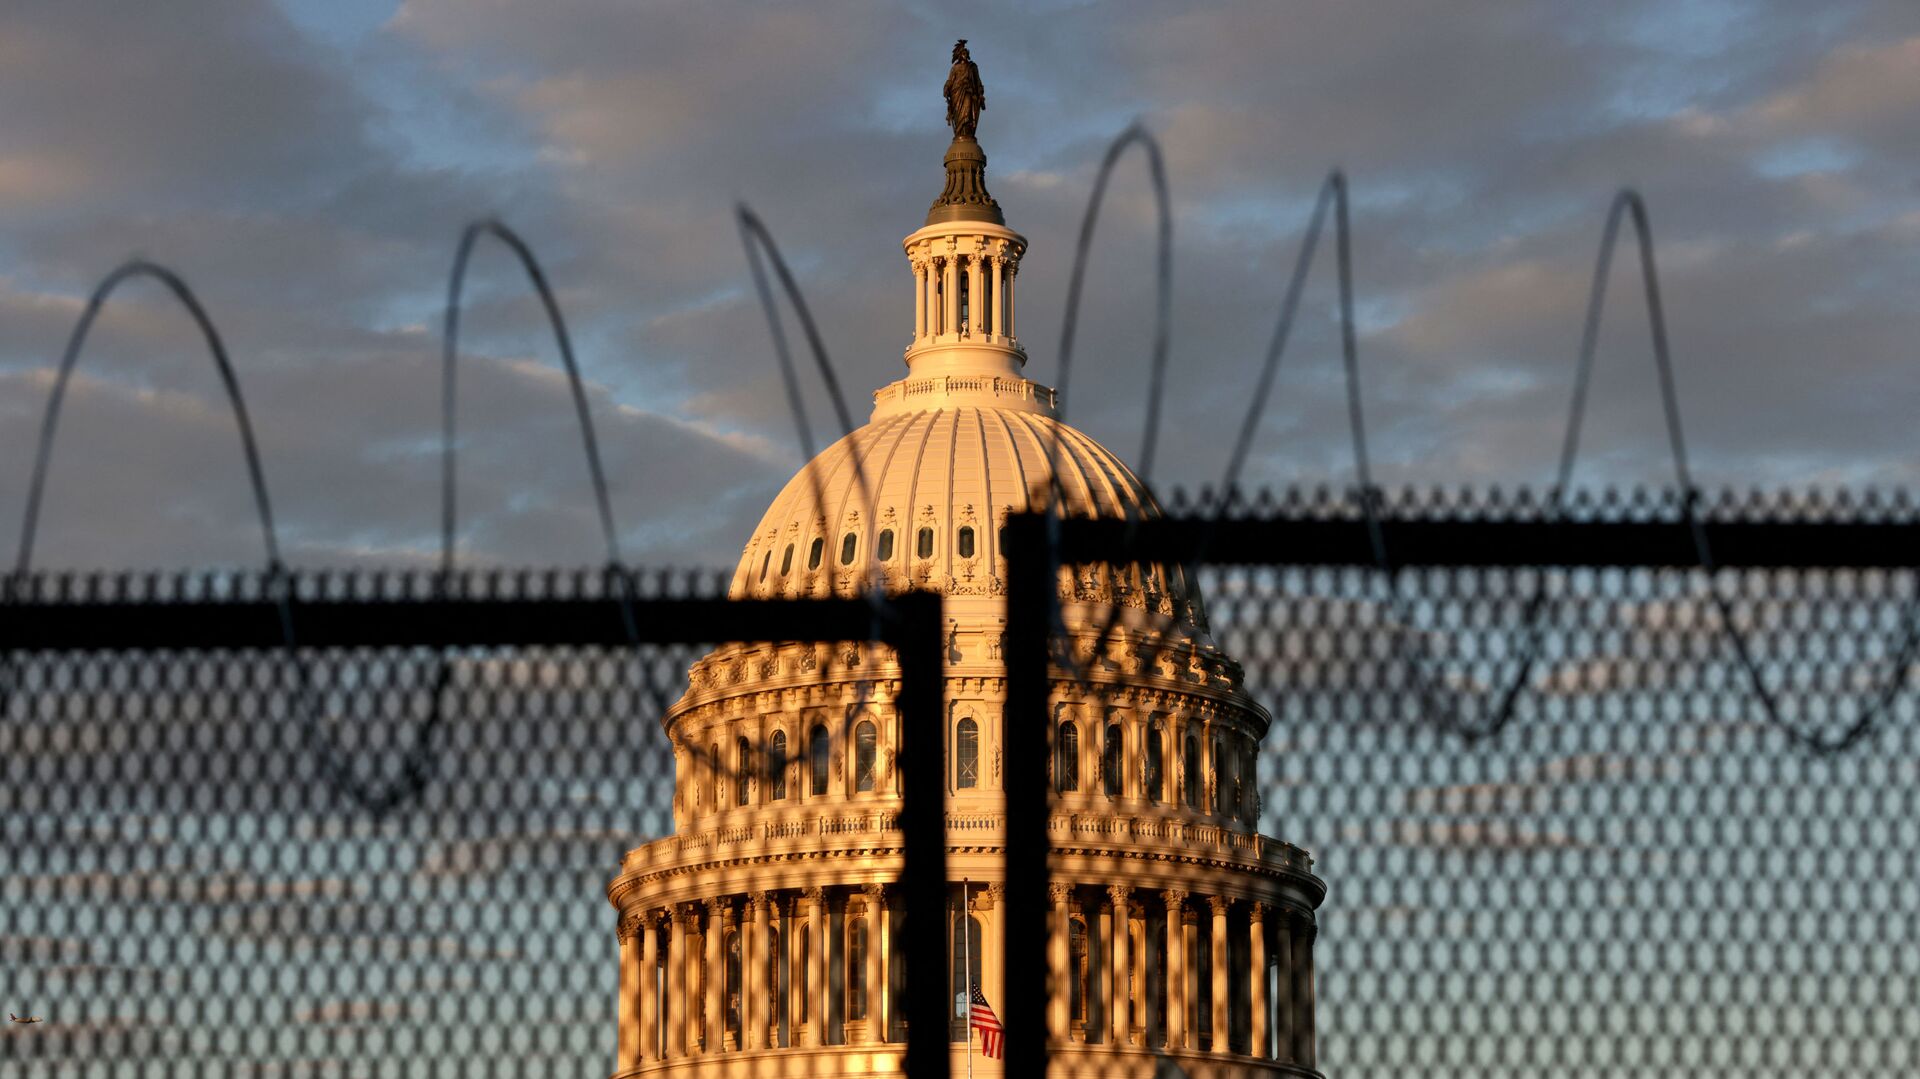  The U.S. Capitol is seen behind a fence with razor wire during sunrise on January 16, 2021 in Washington, DC. After last week's riots at the U.S. Capitol Building, the FBI has warned of additional threats in the nation's capital and in all 50 states. According to reports, as many as 25,000 National Guard soldiers will be guarding the city as preparations are made for the inauguration of Joe Biden as the 46th U.S. President. - Sputnik International, 1920, 02.09.2021